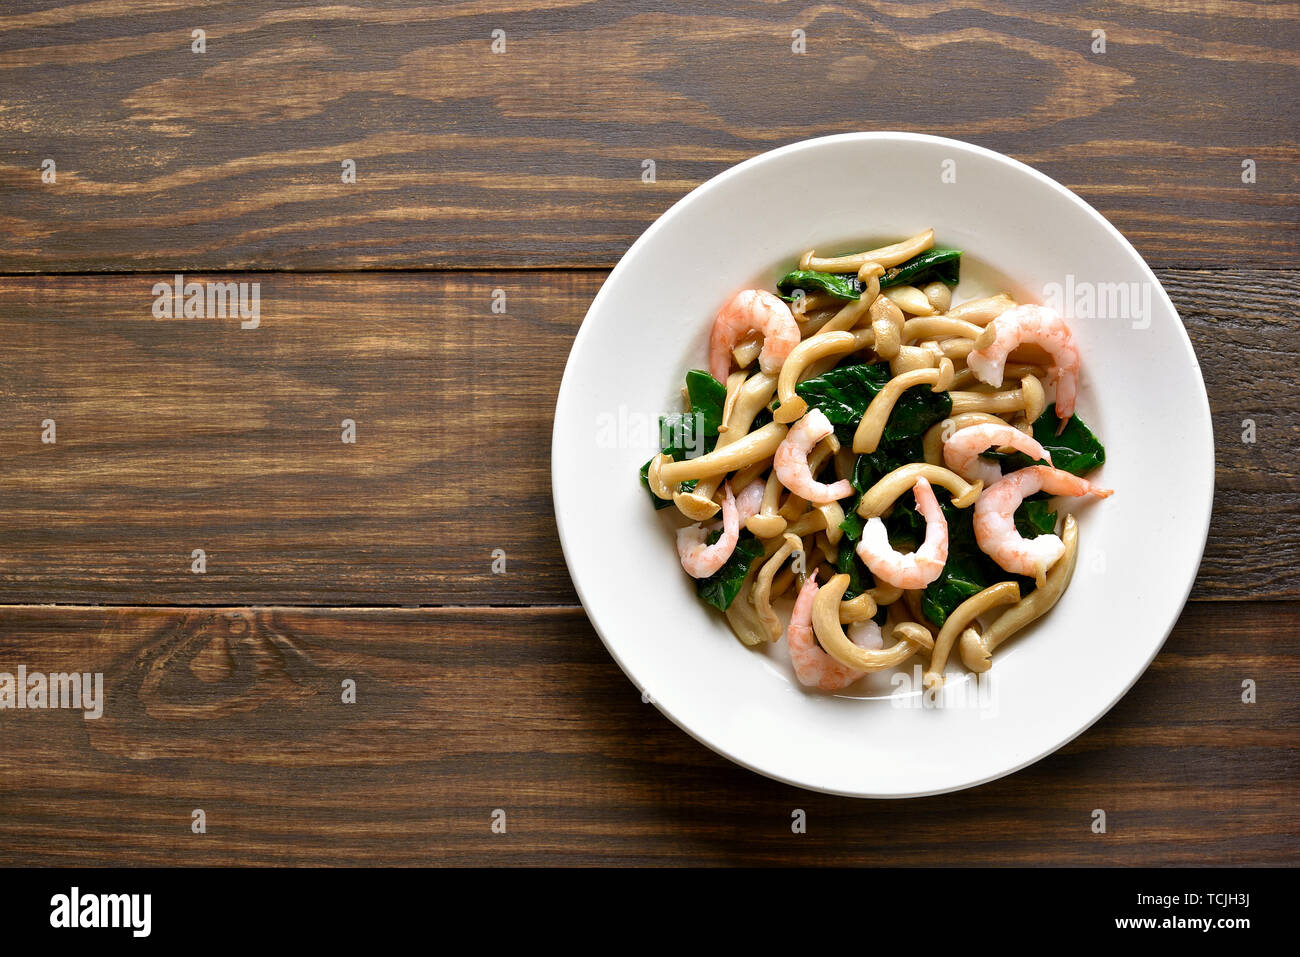 Stir-fried white beech mushrooms with leaves of spinach and shrimps on wooden background with copy space. Top view, flat lay Stock Photo